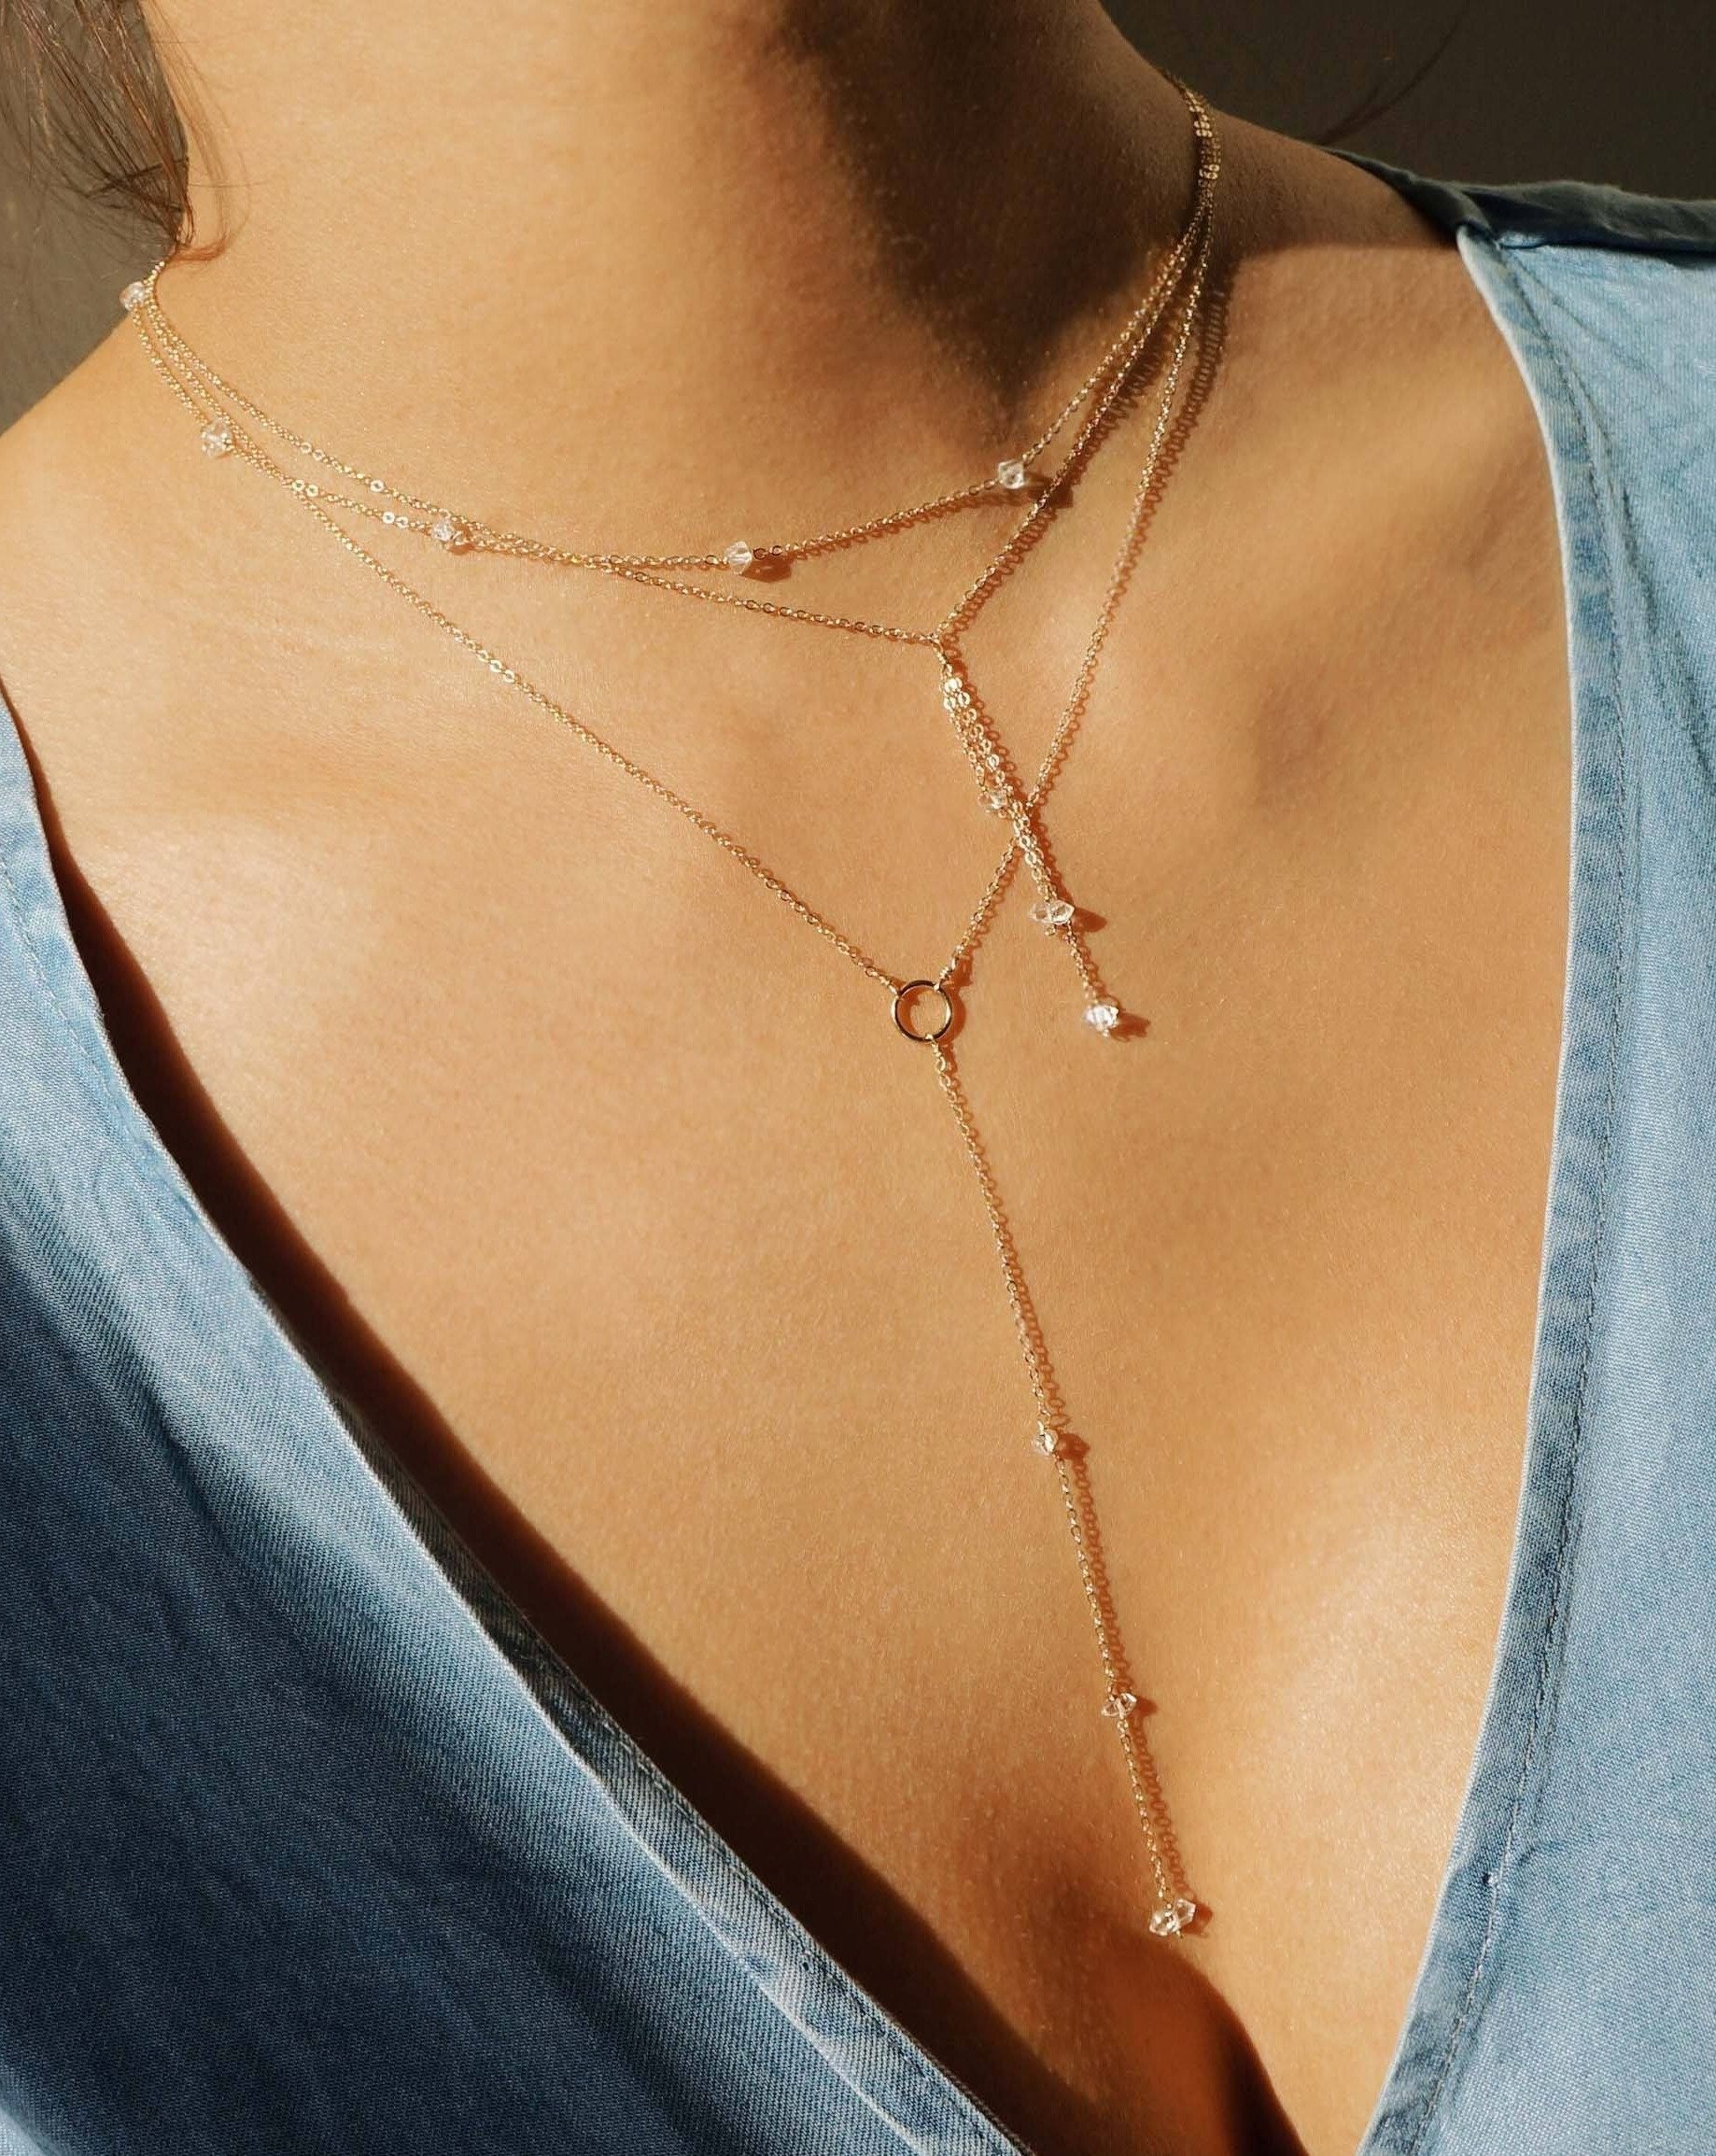 Miren Herkimer Necklace by KOZAKH. A 16 to 18 inch adjustable length, 2 inches drop lariat style necklace, crafted in 14K Gold Filled, featuring Herkimer Diamonds.